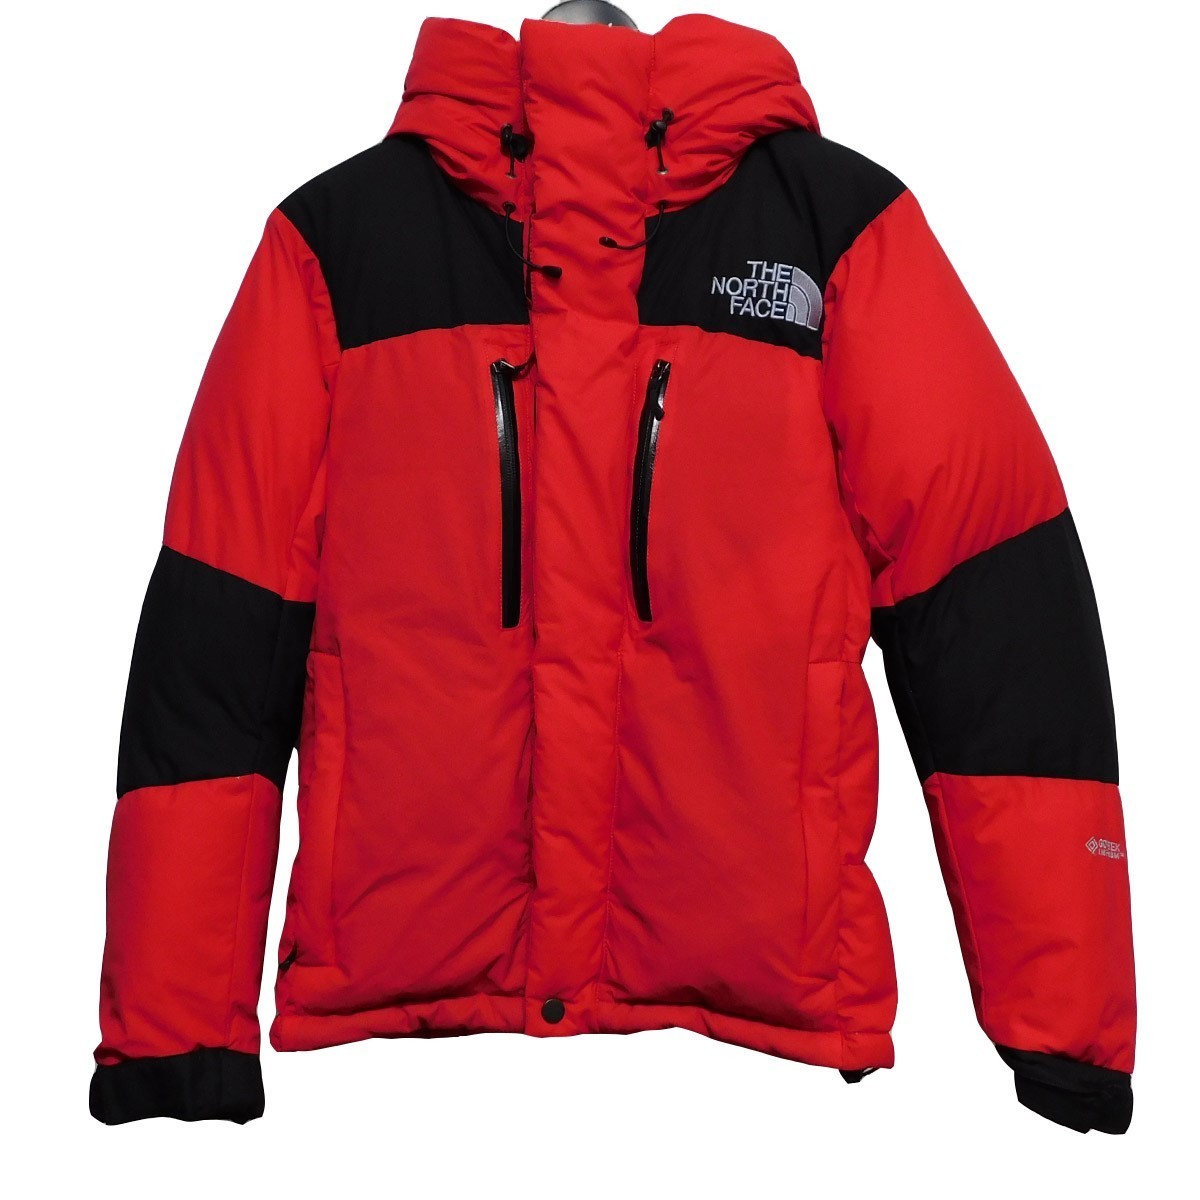 THE NORTH FACE　BALTRO LIGHT JACKET バルトロライトジャケット ND91950　8071000060754